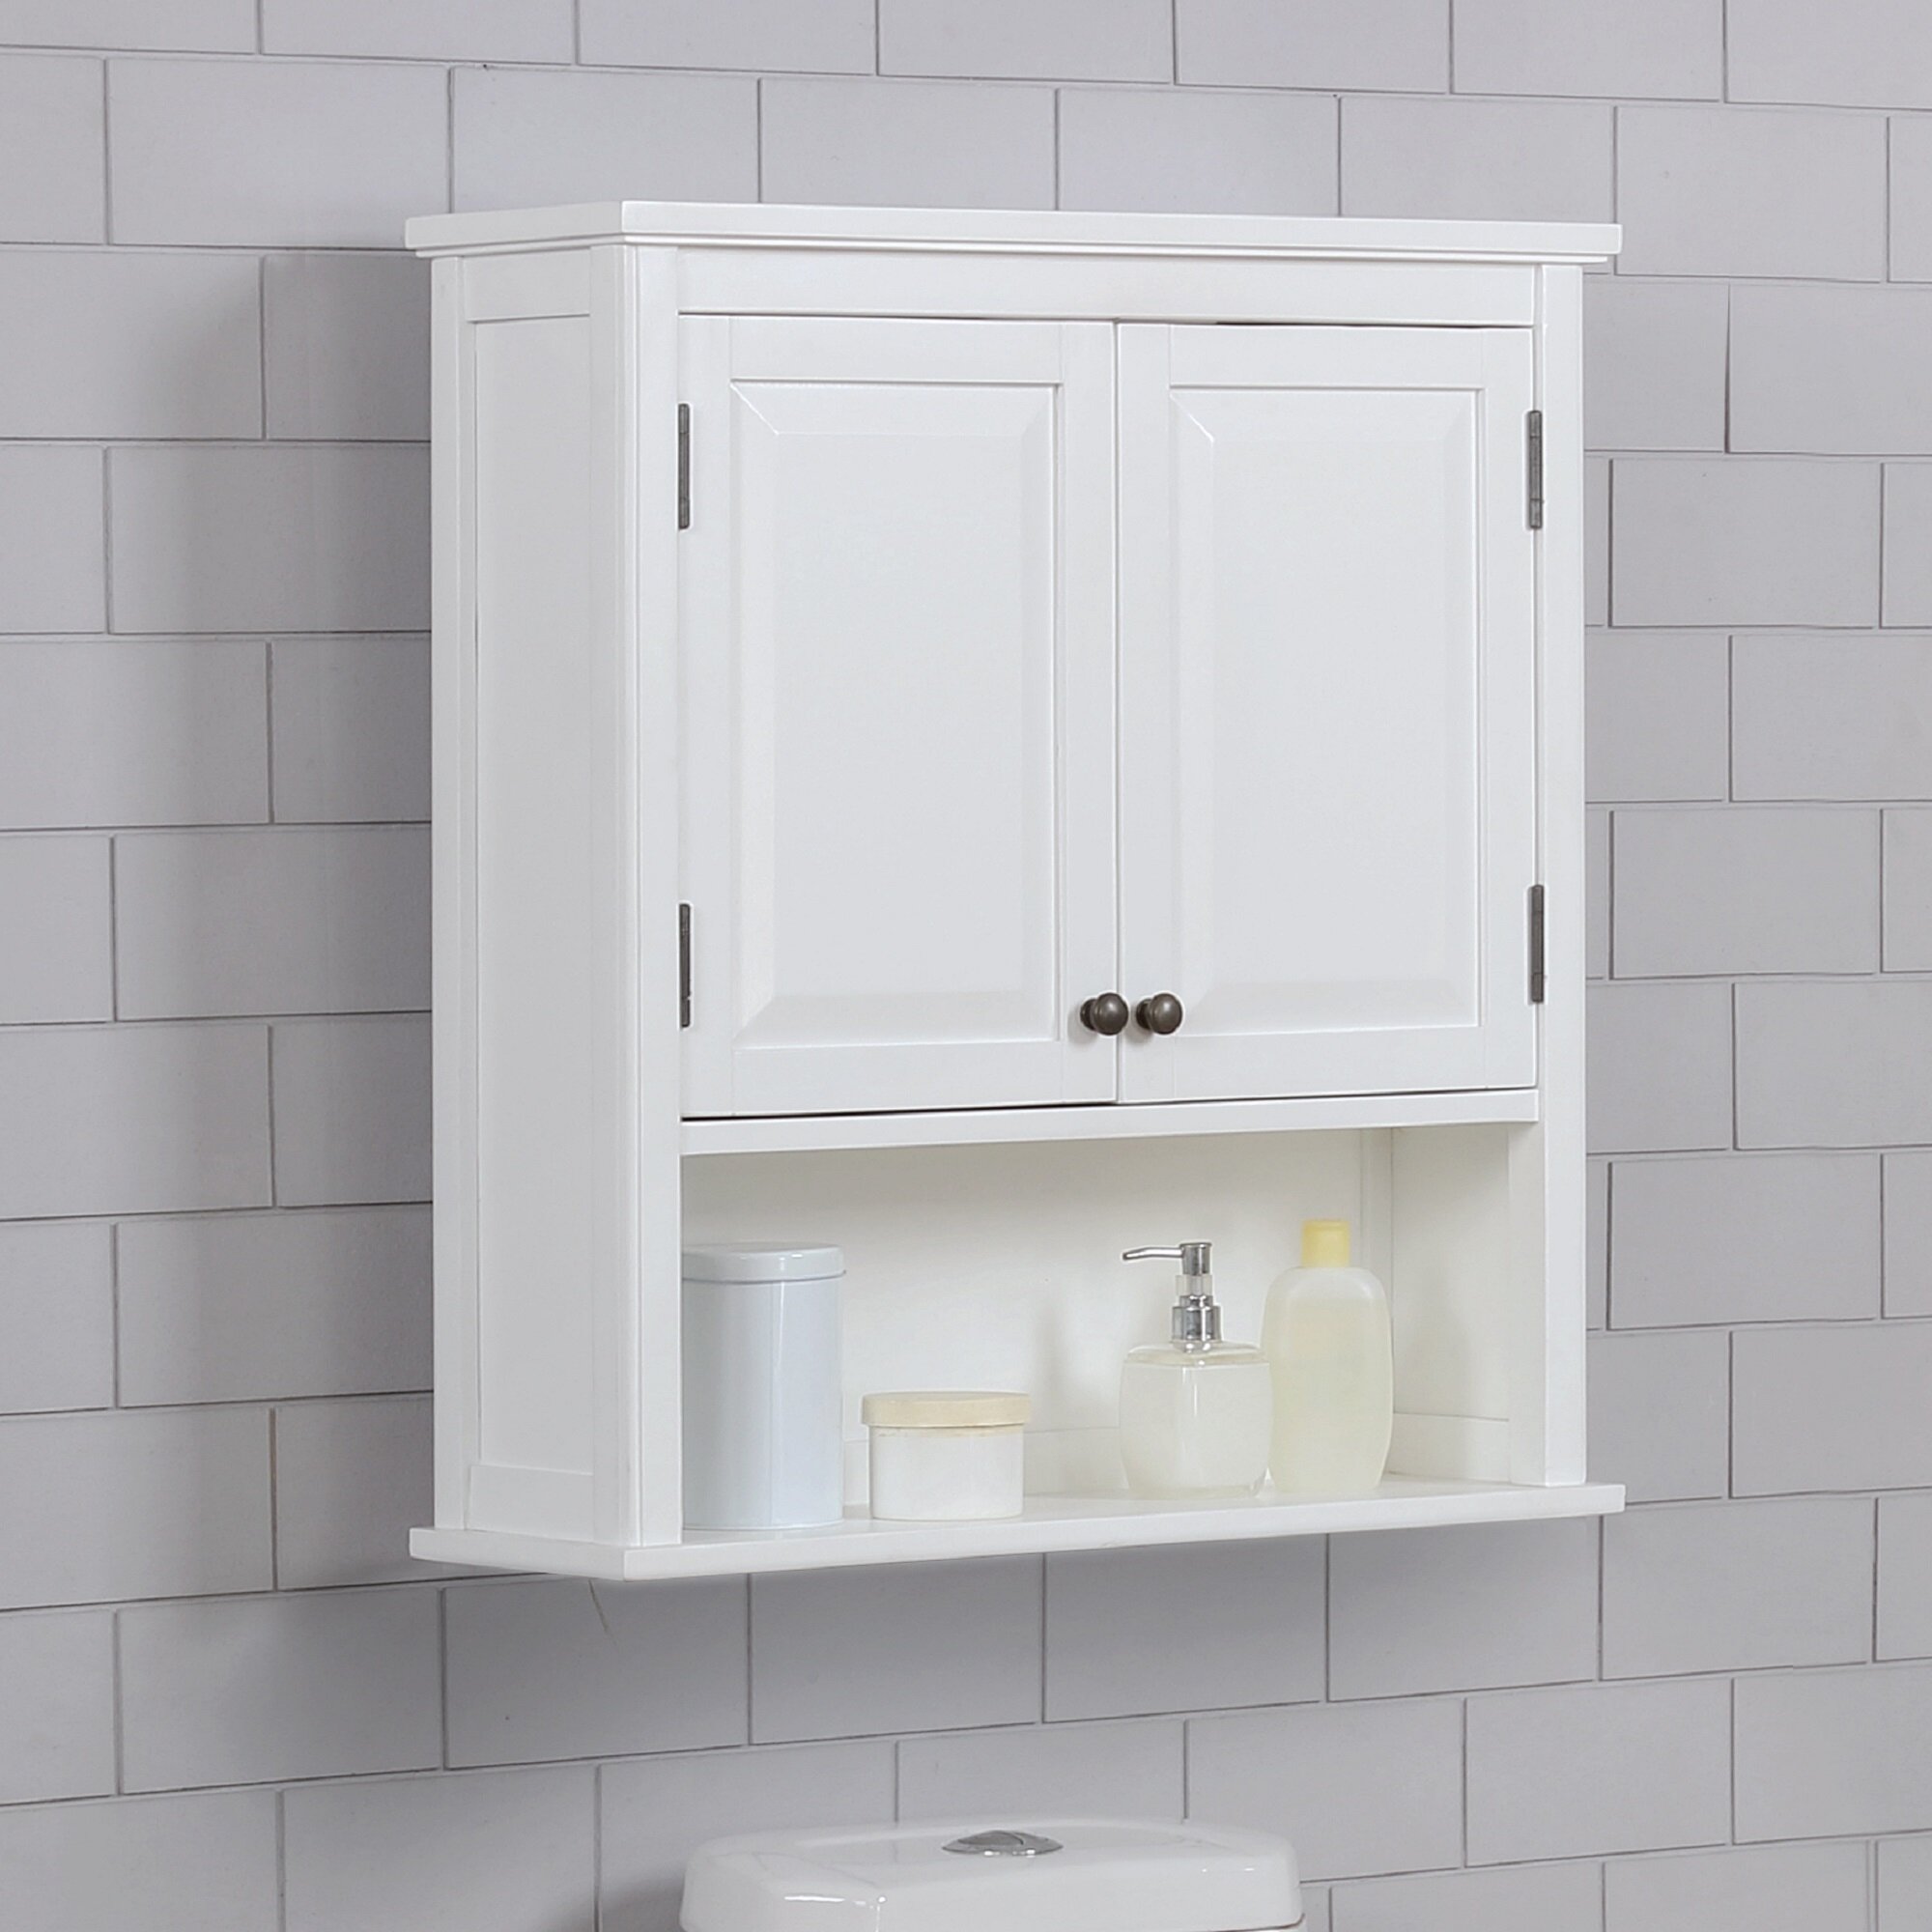 wall mounted bathroom cabinet - Home Decor Ideas Best Room Decorating ...